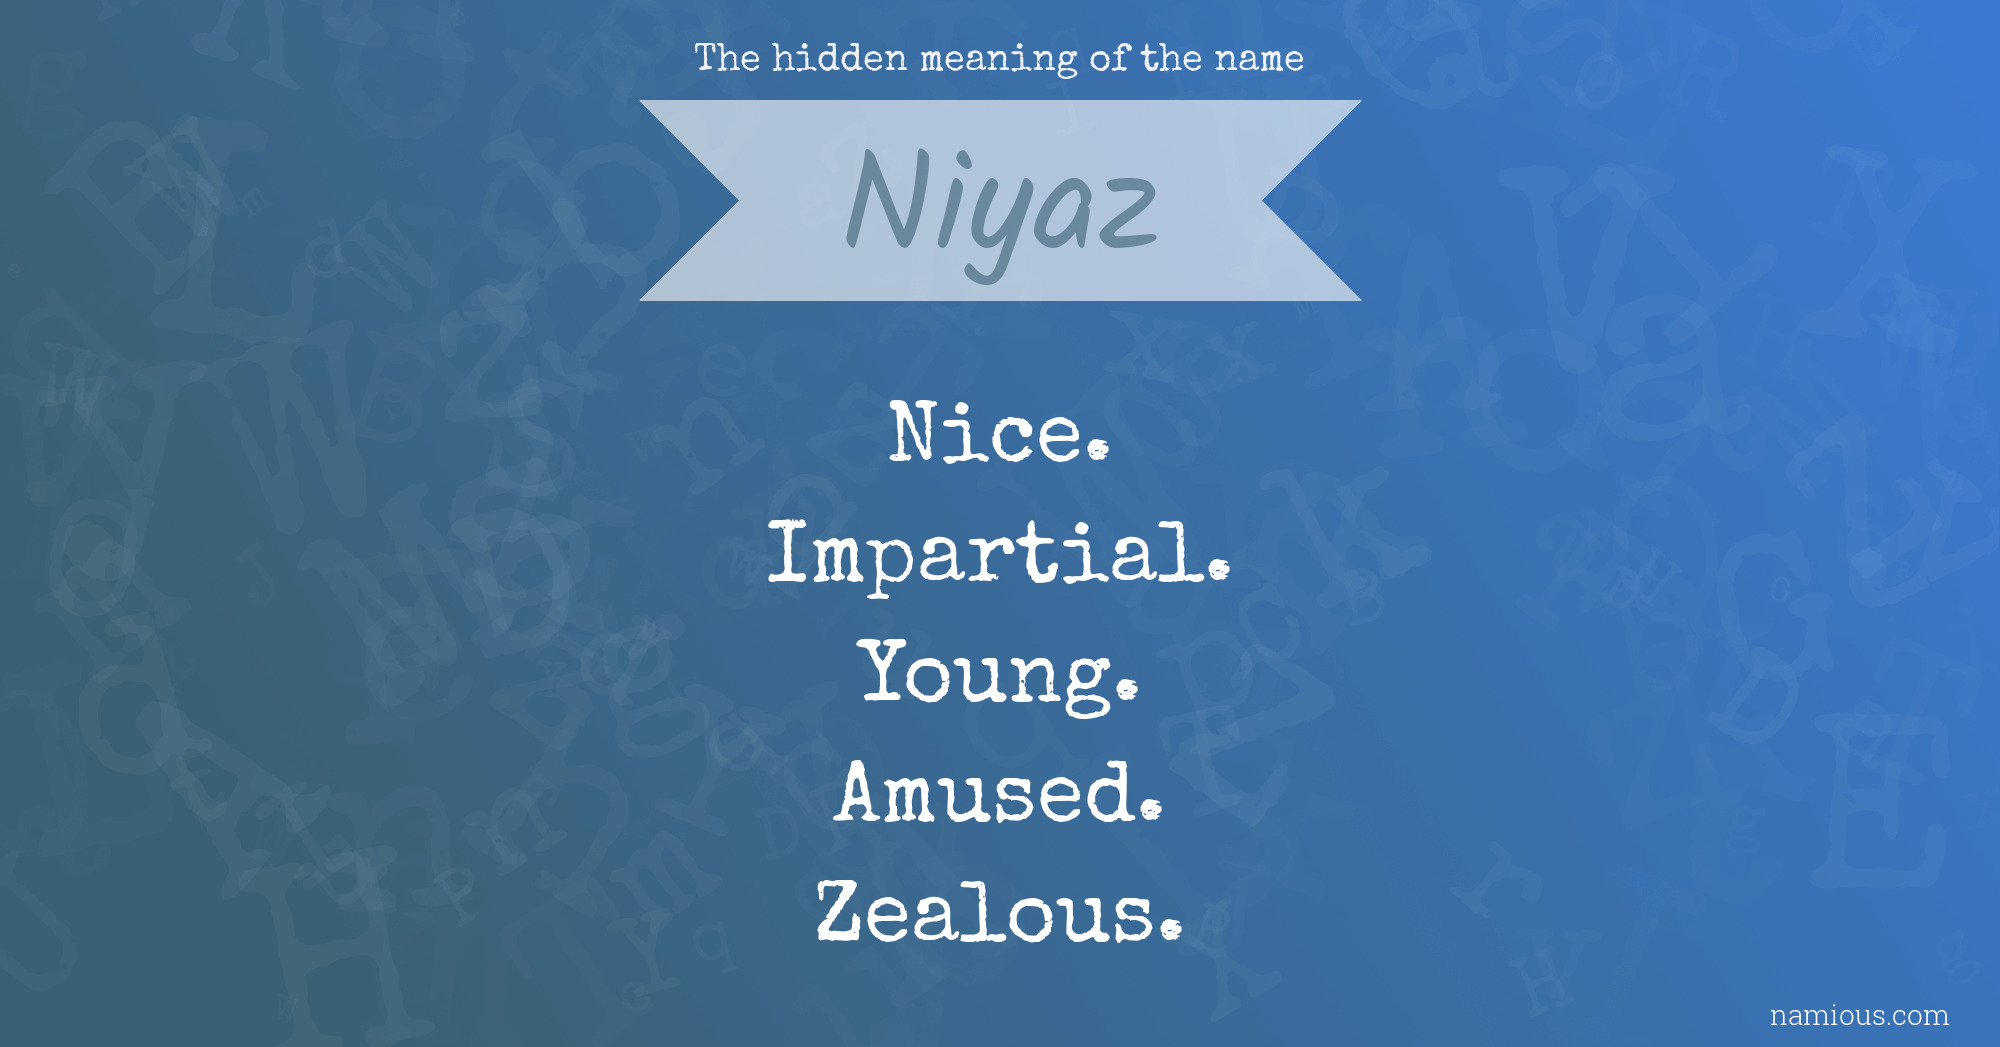 The hidden meaning of the name Niyaz